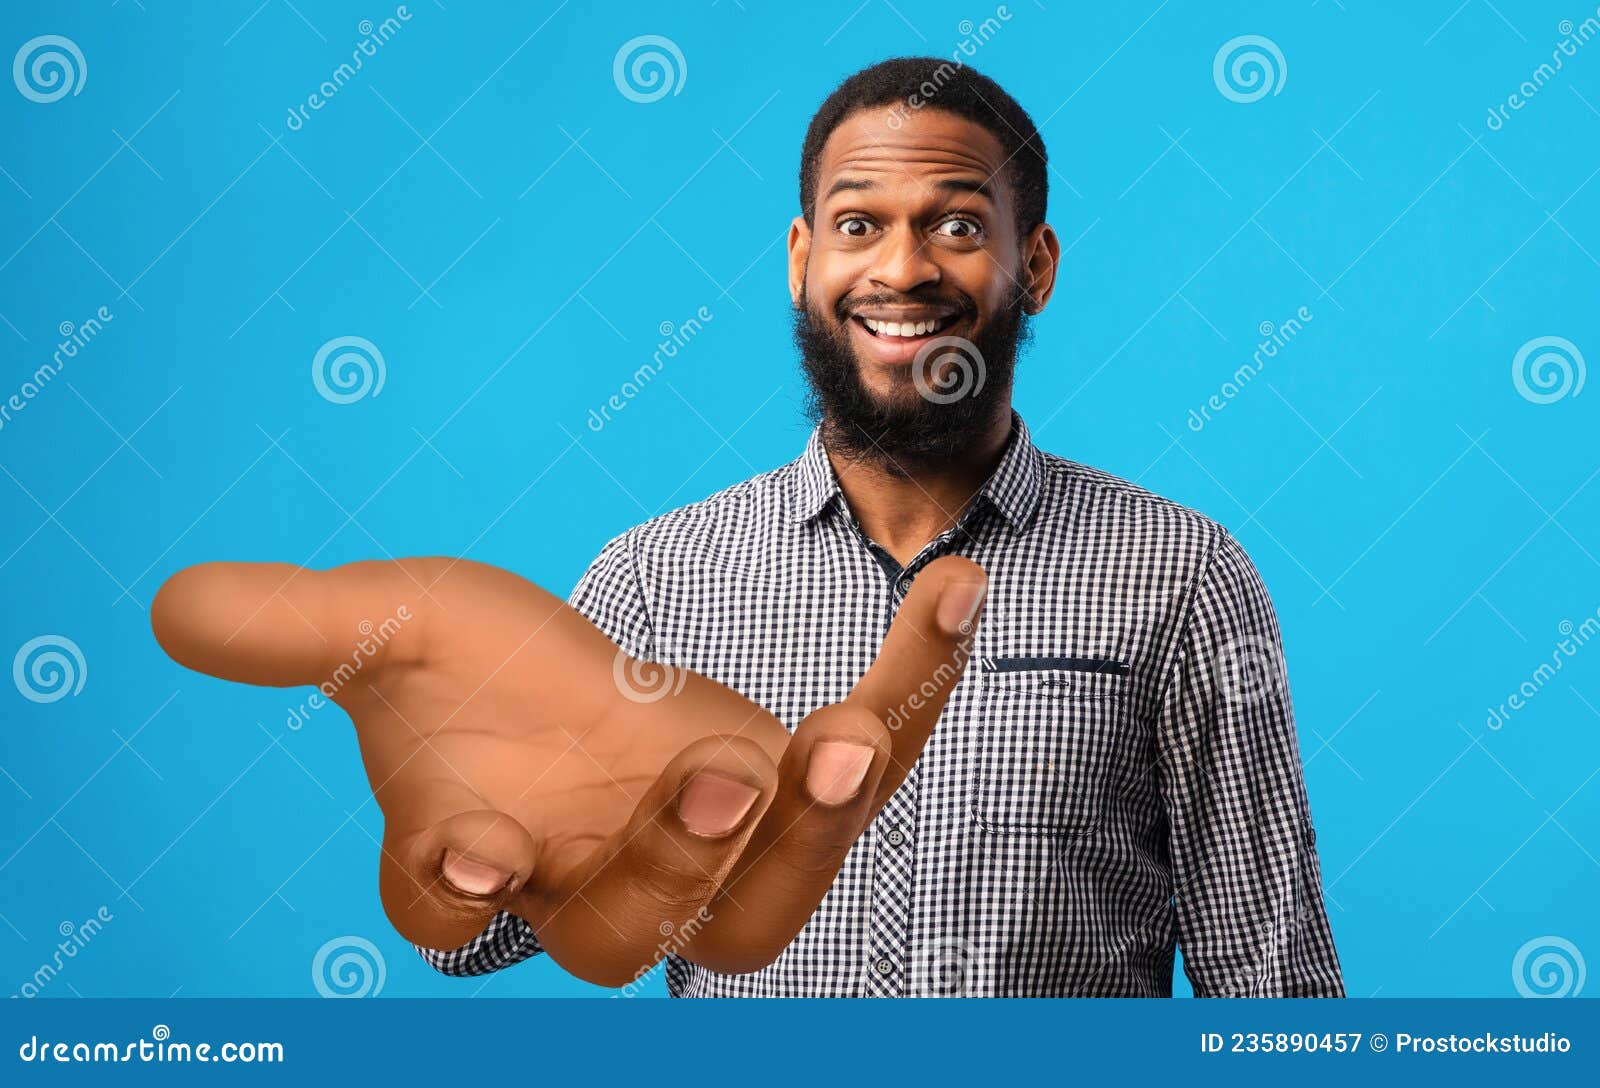 surprised young black man standing with big outstretched hand on blue studio background, mockup for your product